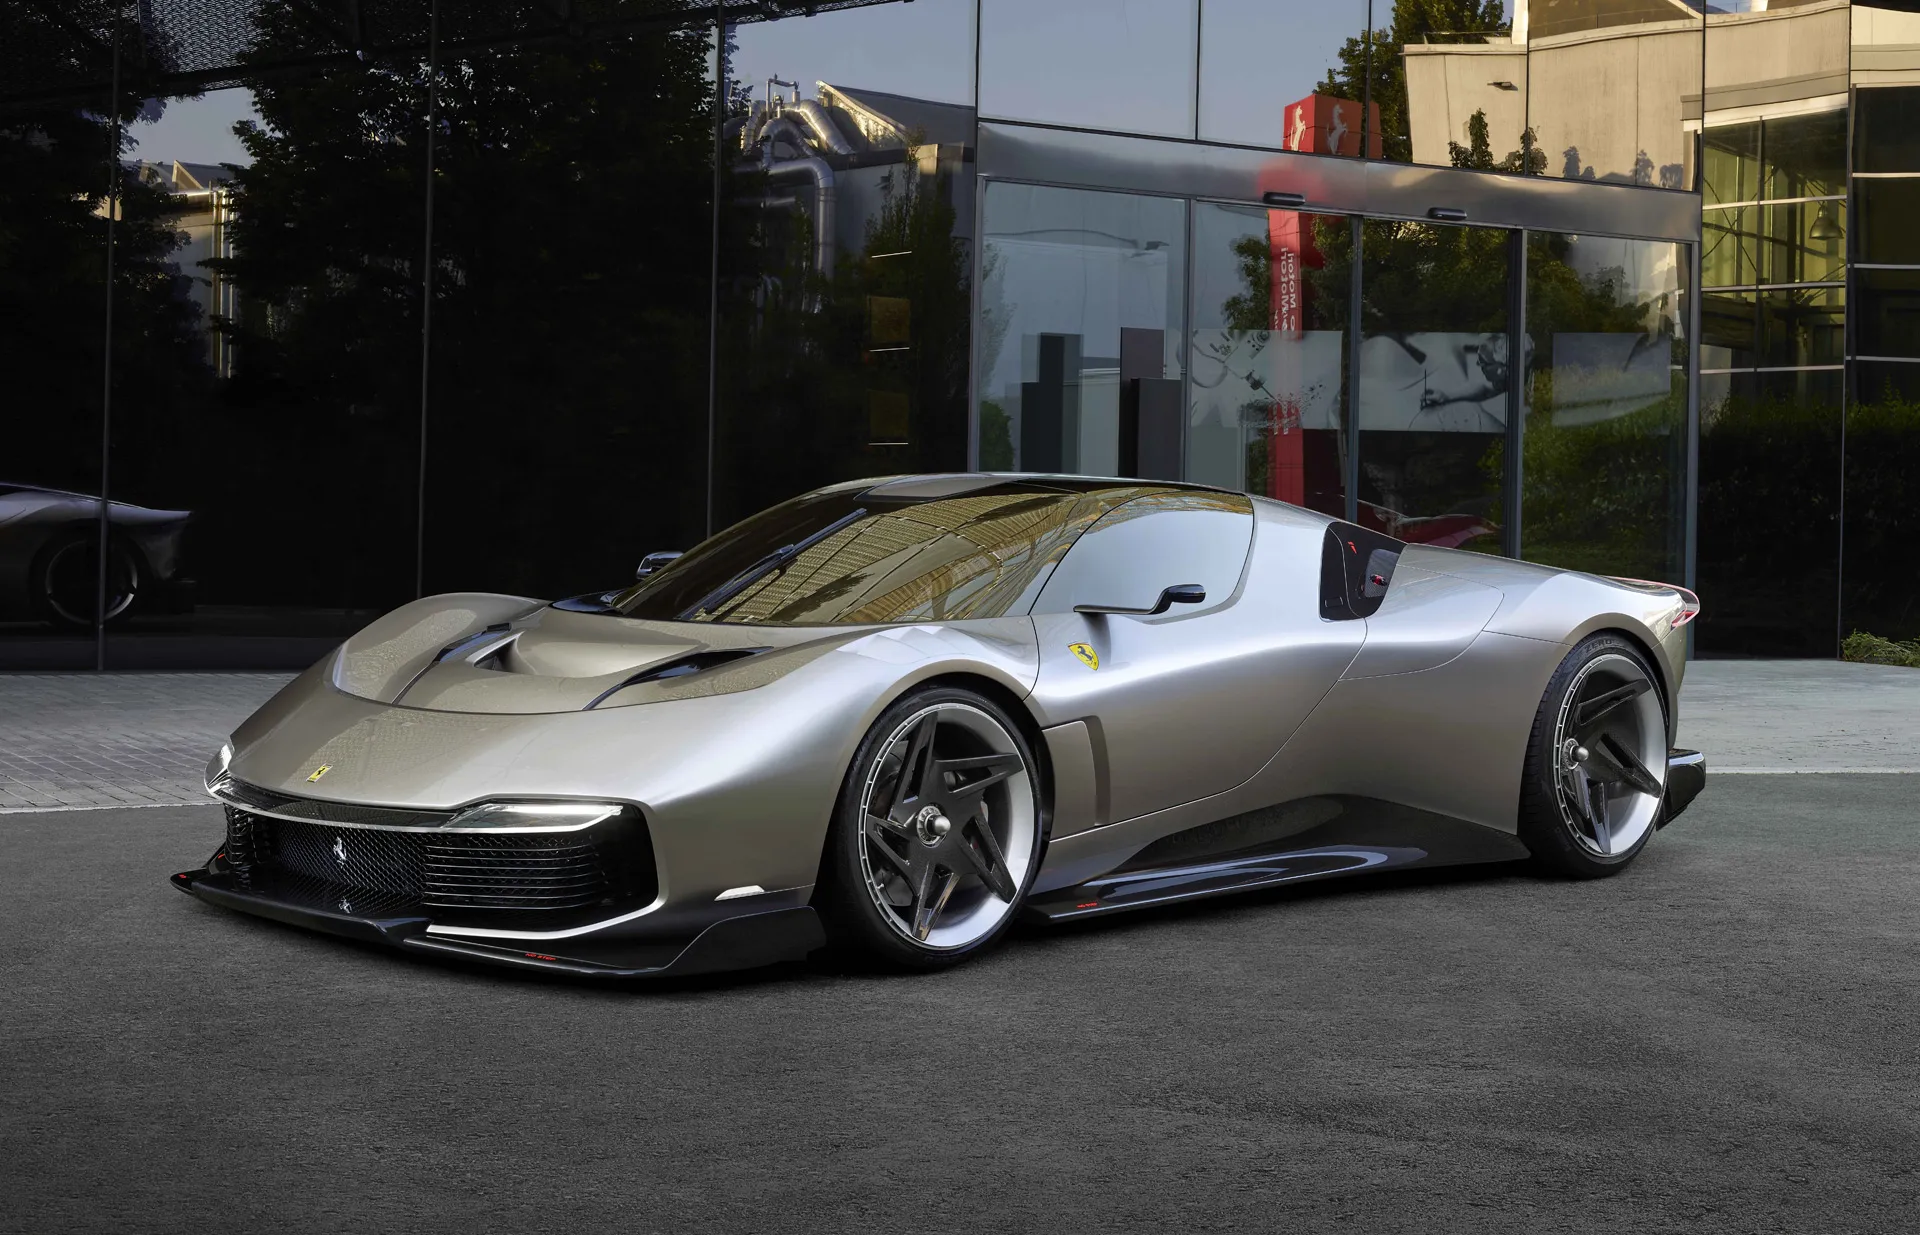 Ferrari KC23 is a one-off car for the racetrack Auto Recent